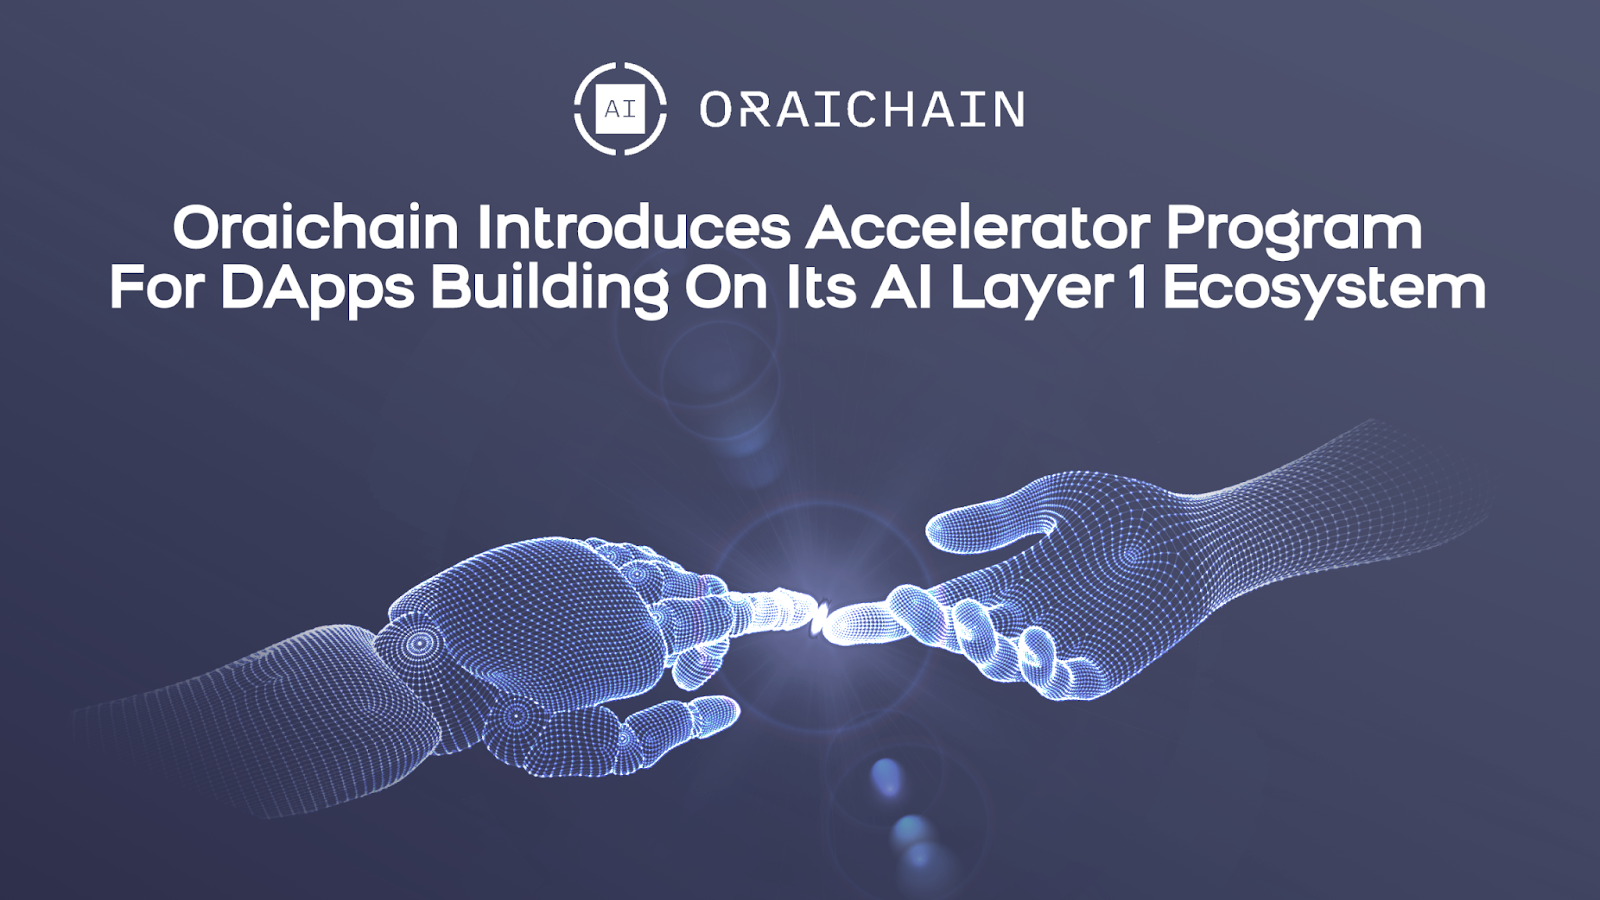 Accelerator Program For Dapps Creation on its AI Layer 1 Ecosystem Announced by Oraichain